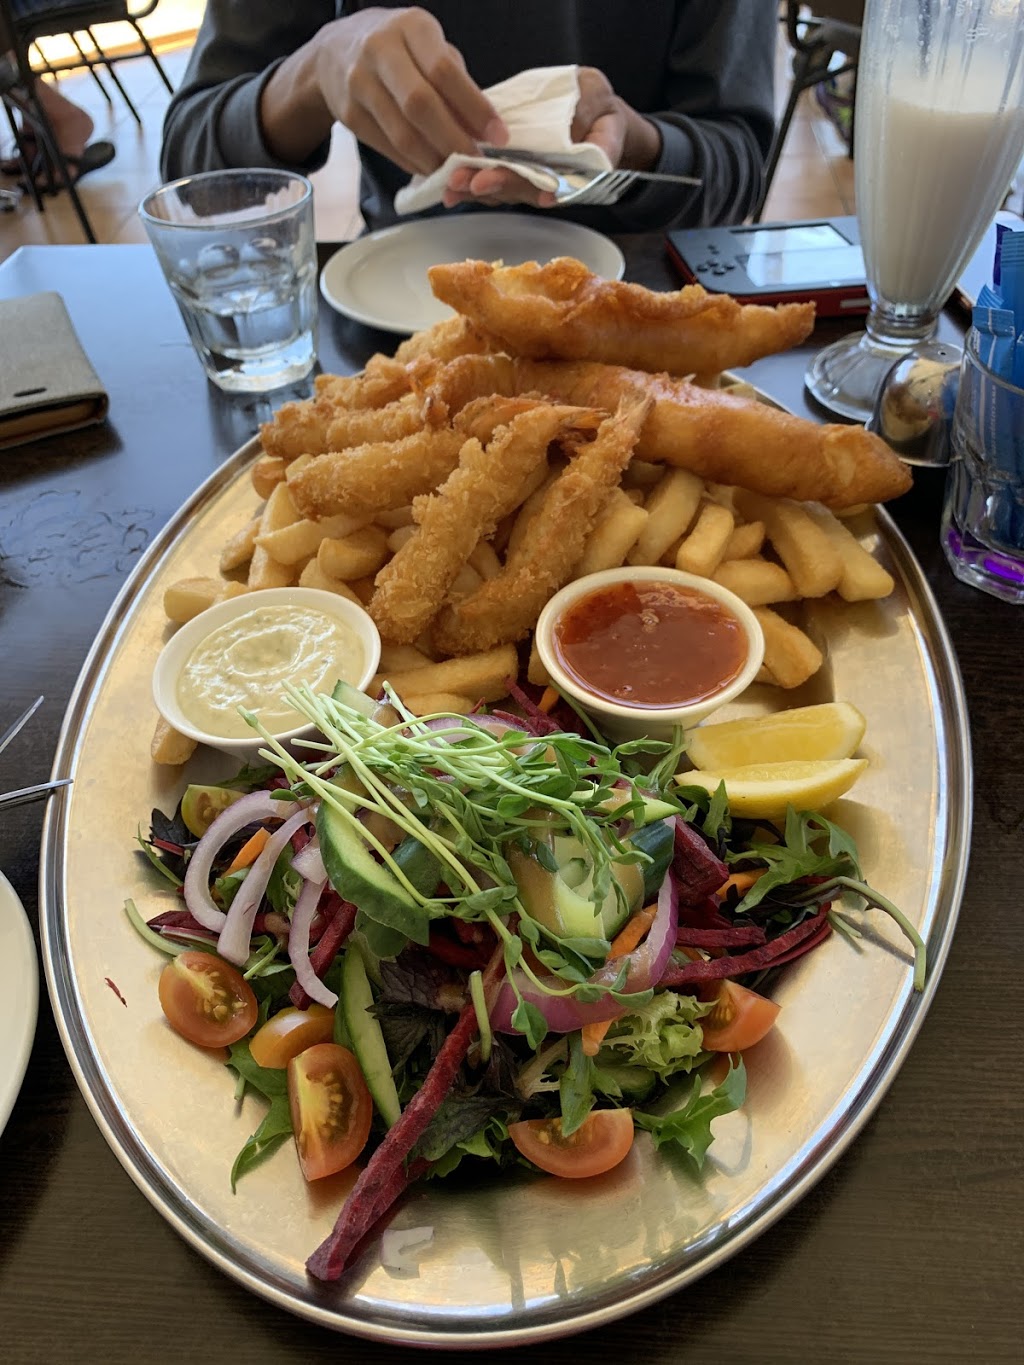 Whales Gallery Cafe | restaurant | 75 Whaling Station Rd, Torndirrup WA 6330, Australia